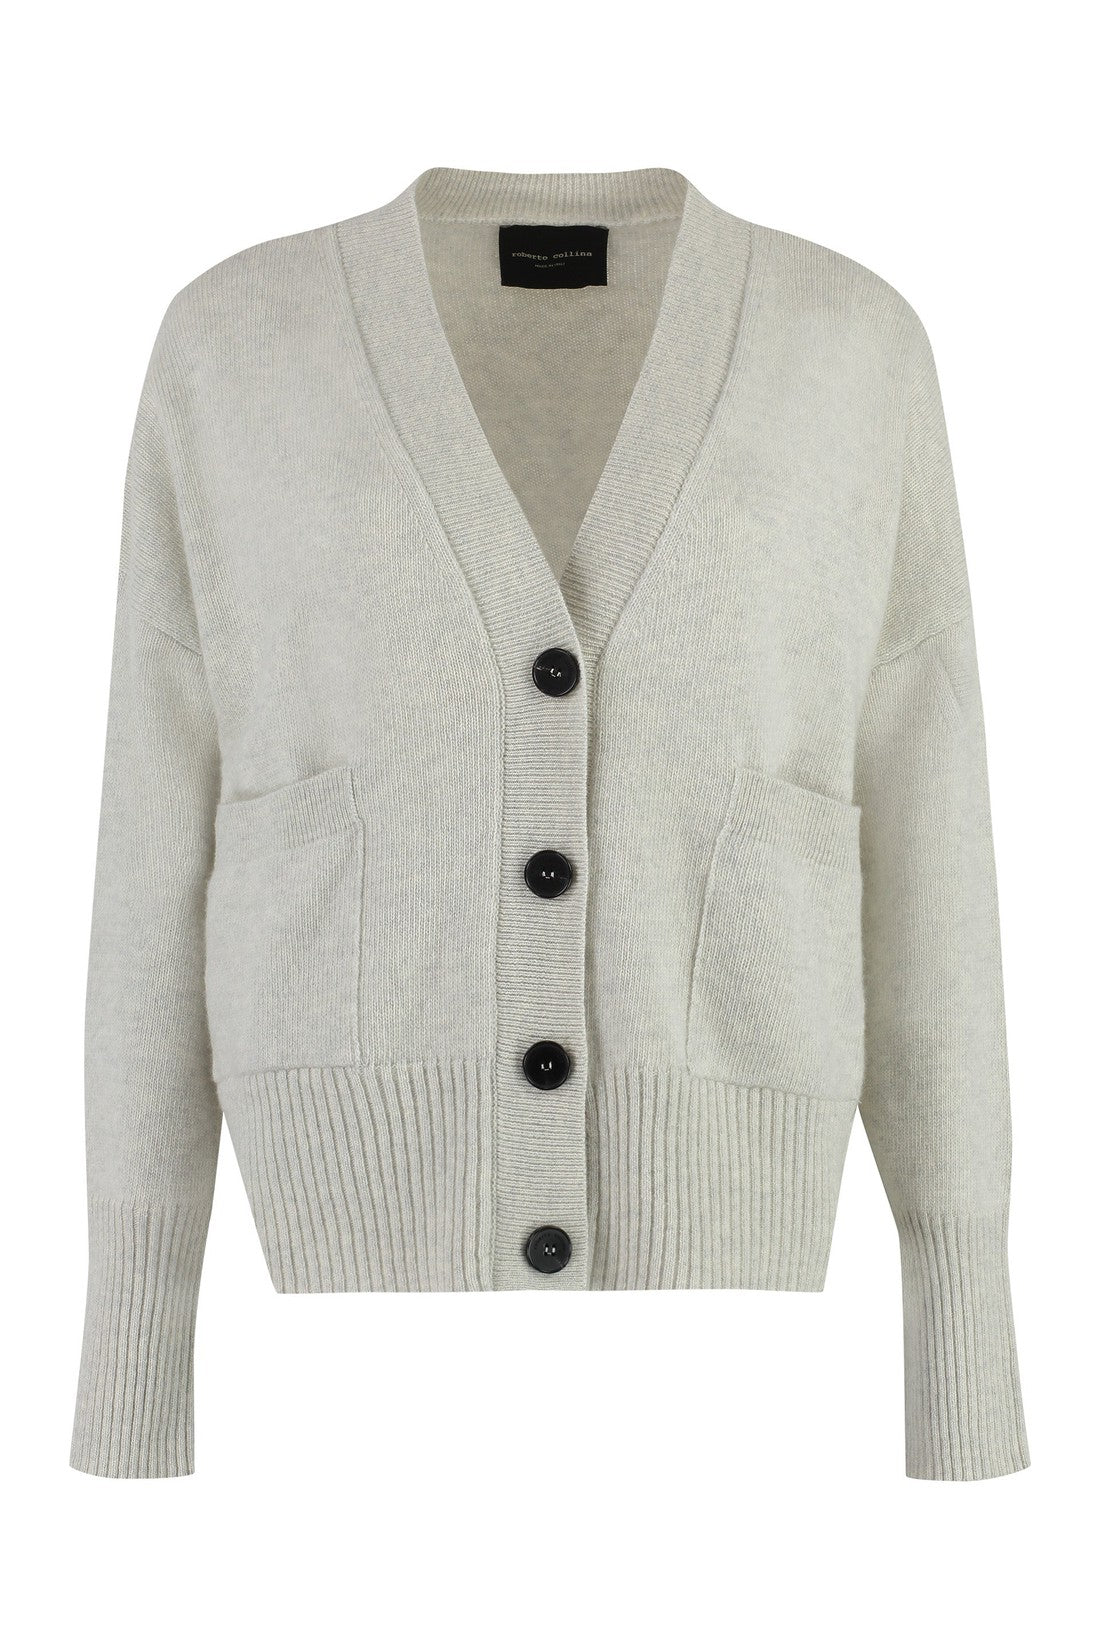 Roberto Collina-OUTLET-SALE-Wool and cashmere cardigan-ARCHIVIST